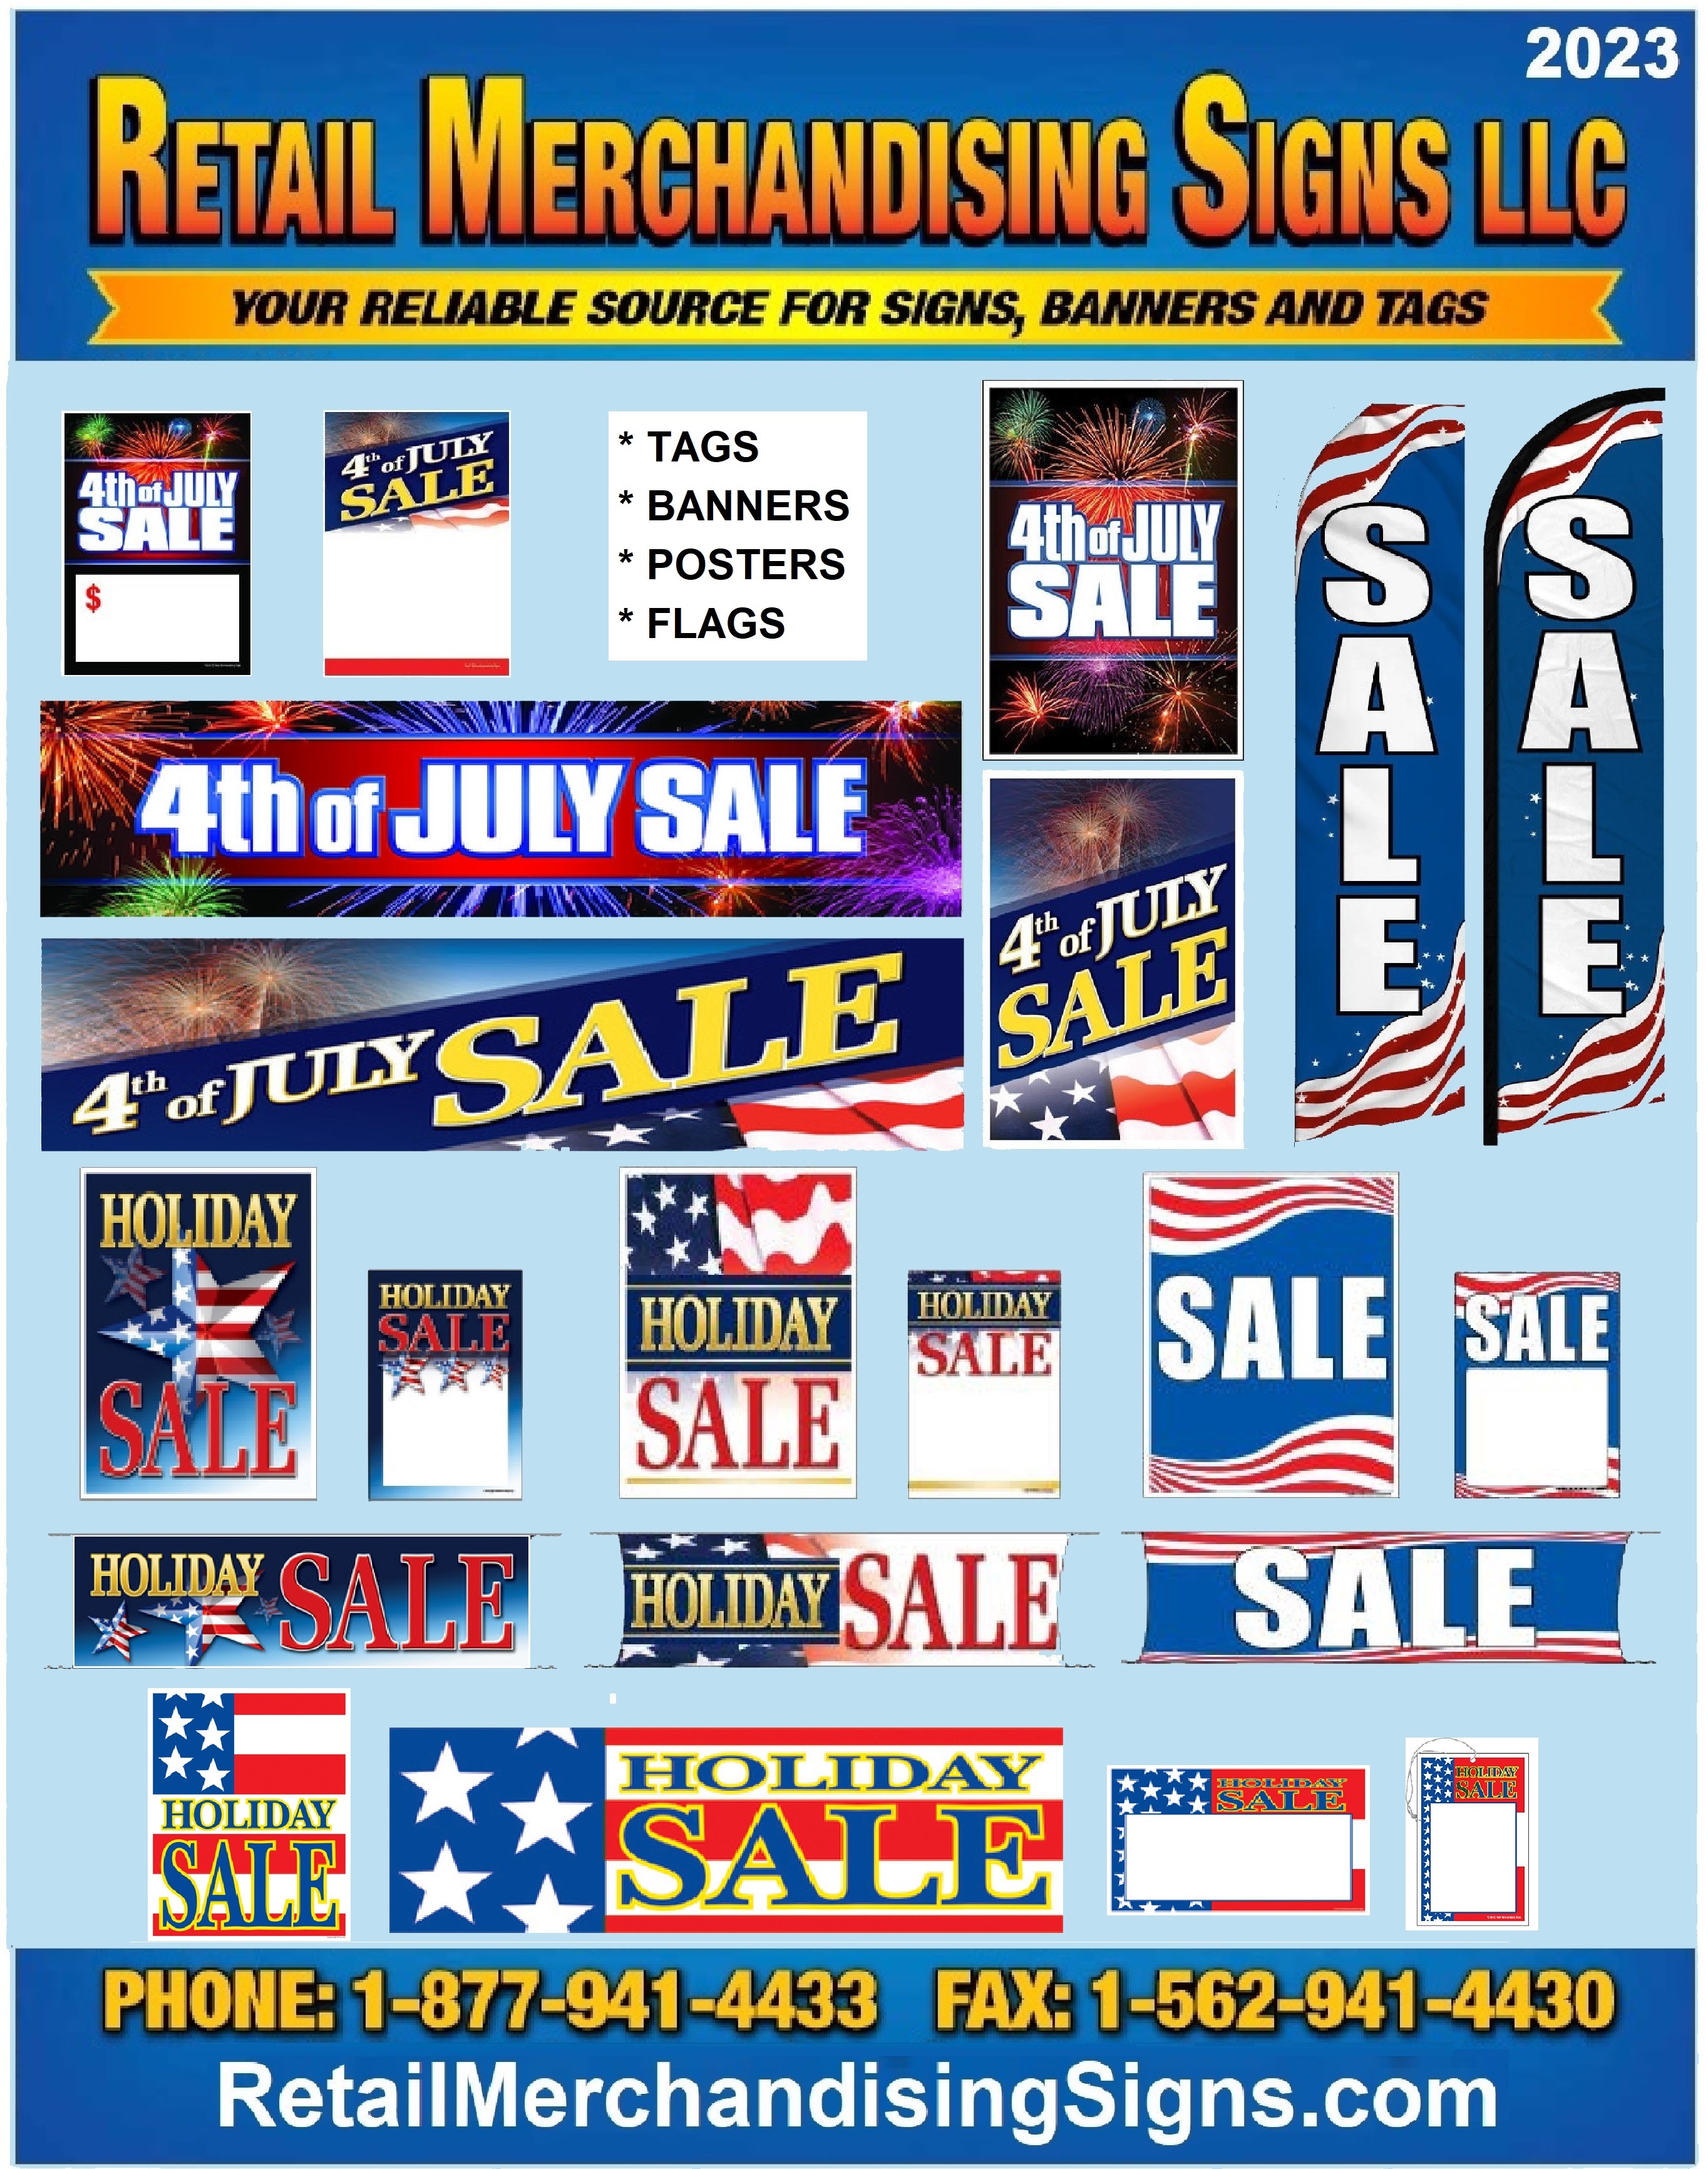 See all 4th of July items...